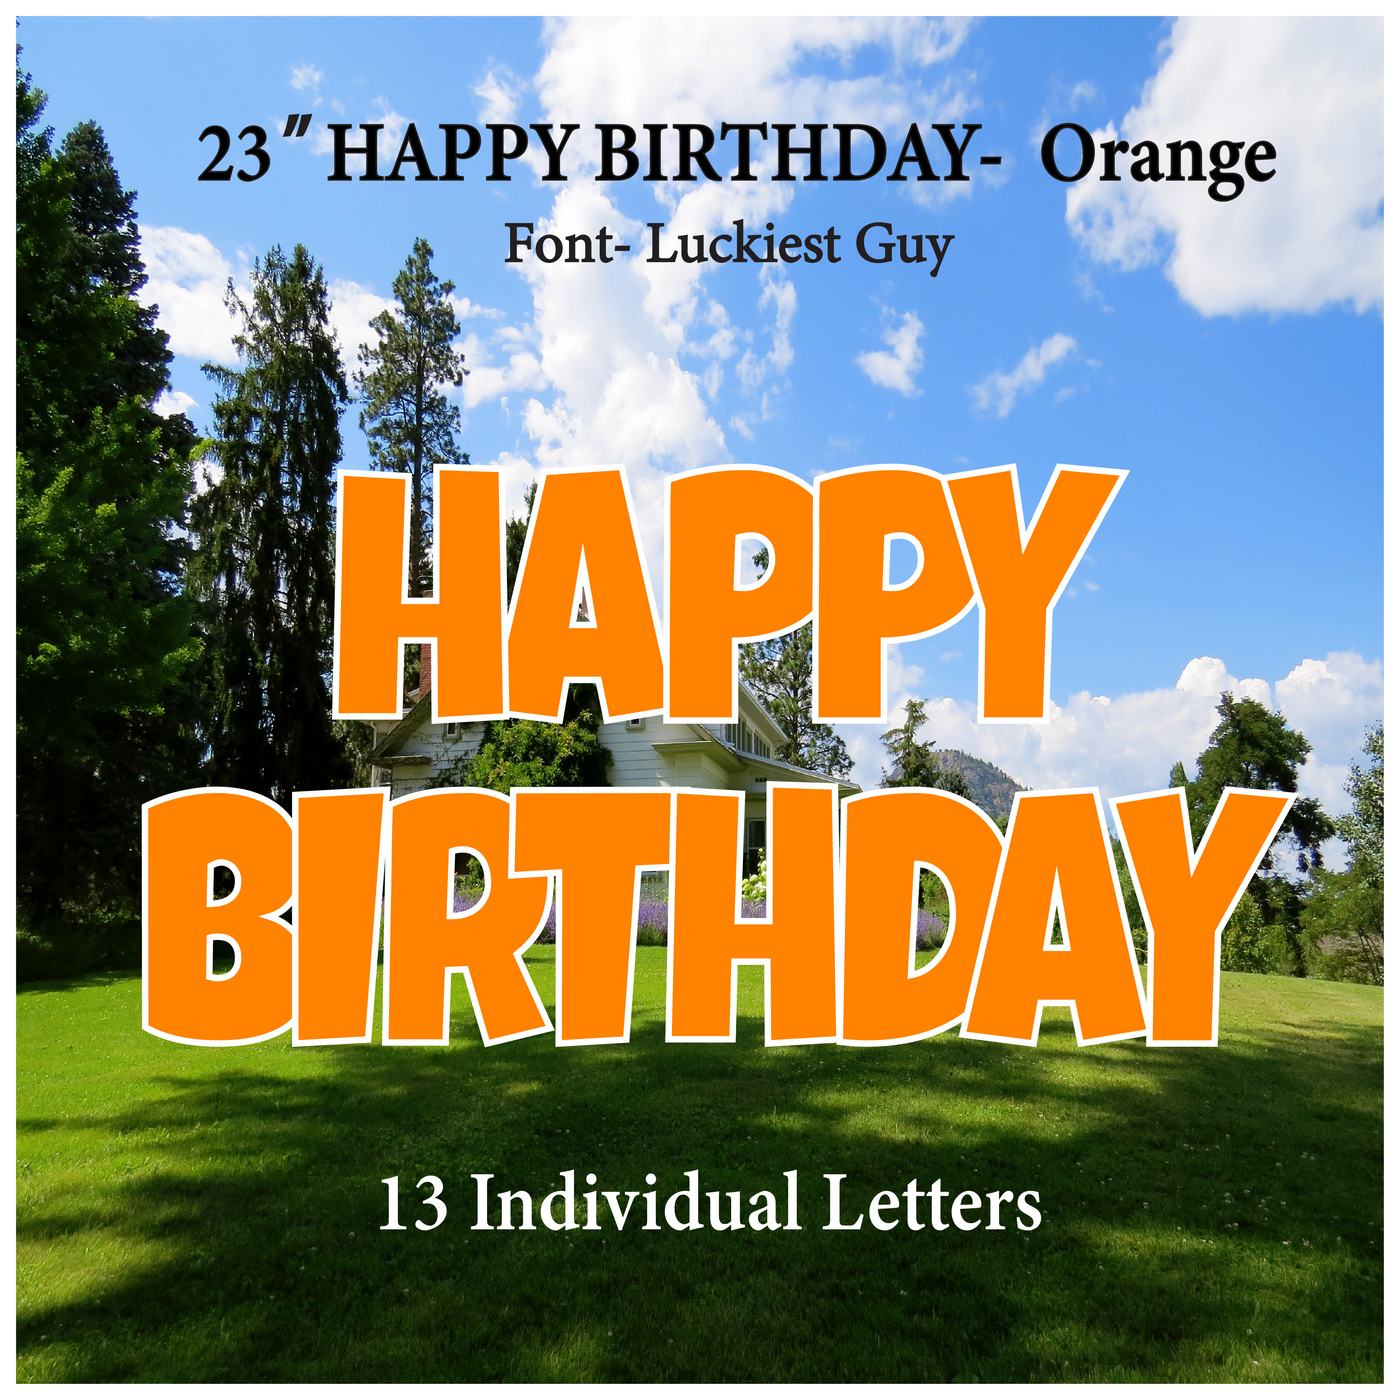 Solid Orange 23''HAPPY BIRTHDAY Including 13 Individual Letters